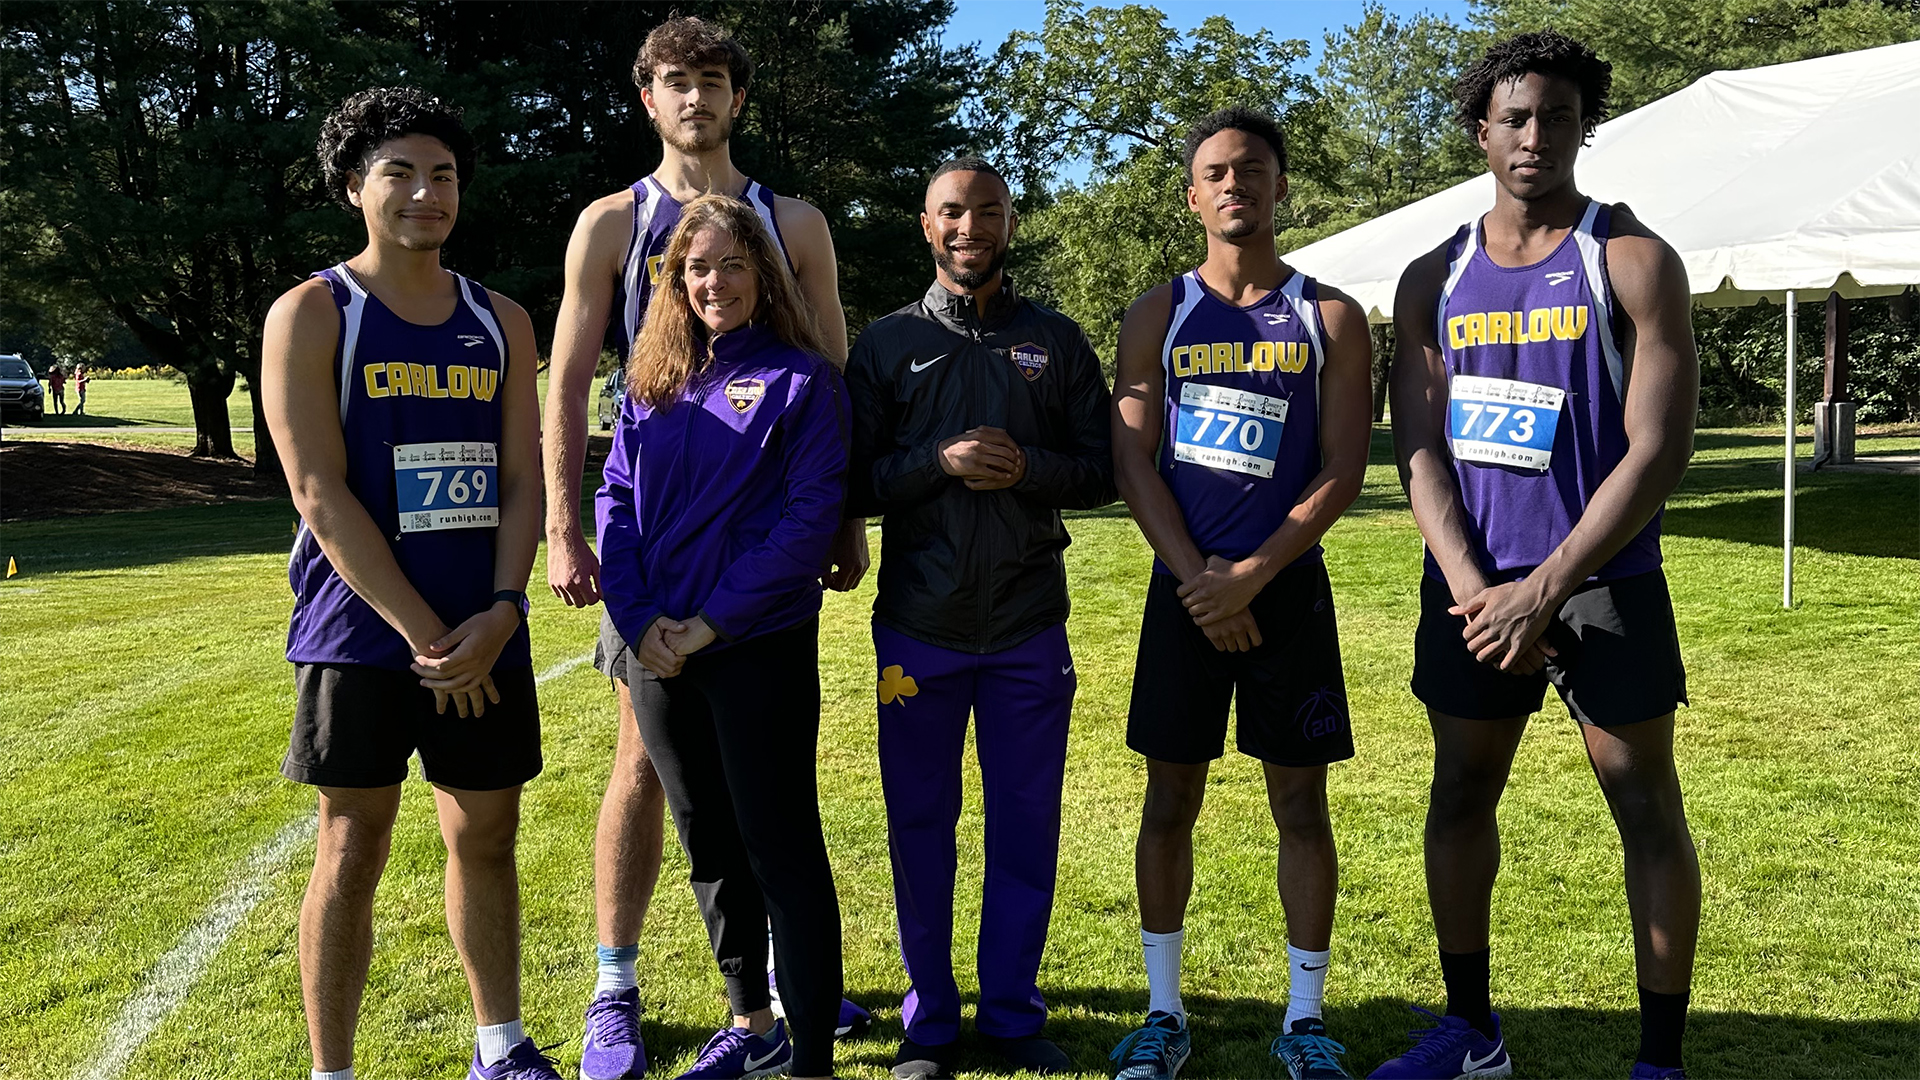 The men’s cross country team with head coach Ashley Soske. Photo courtesy of Ashley Soske.